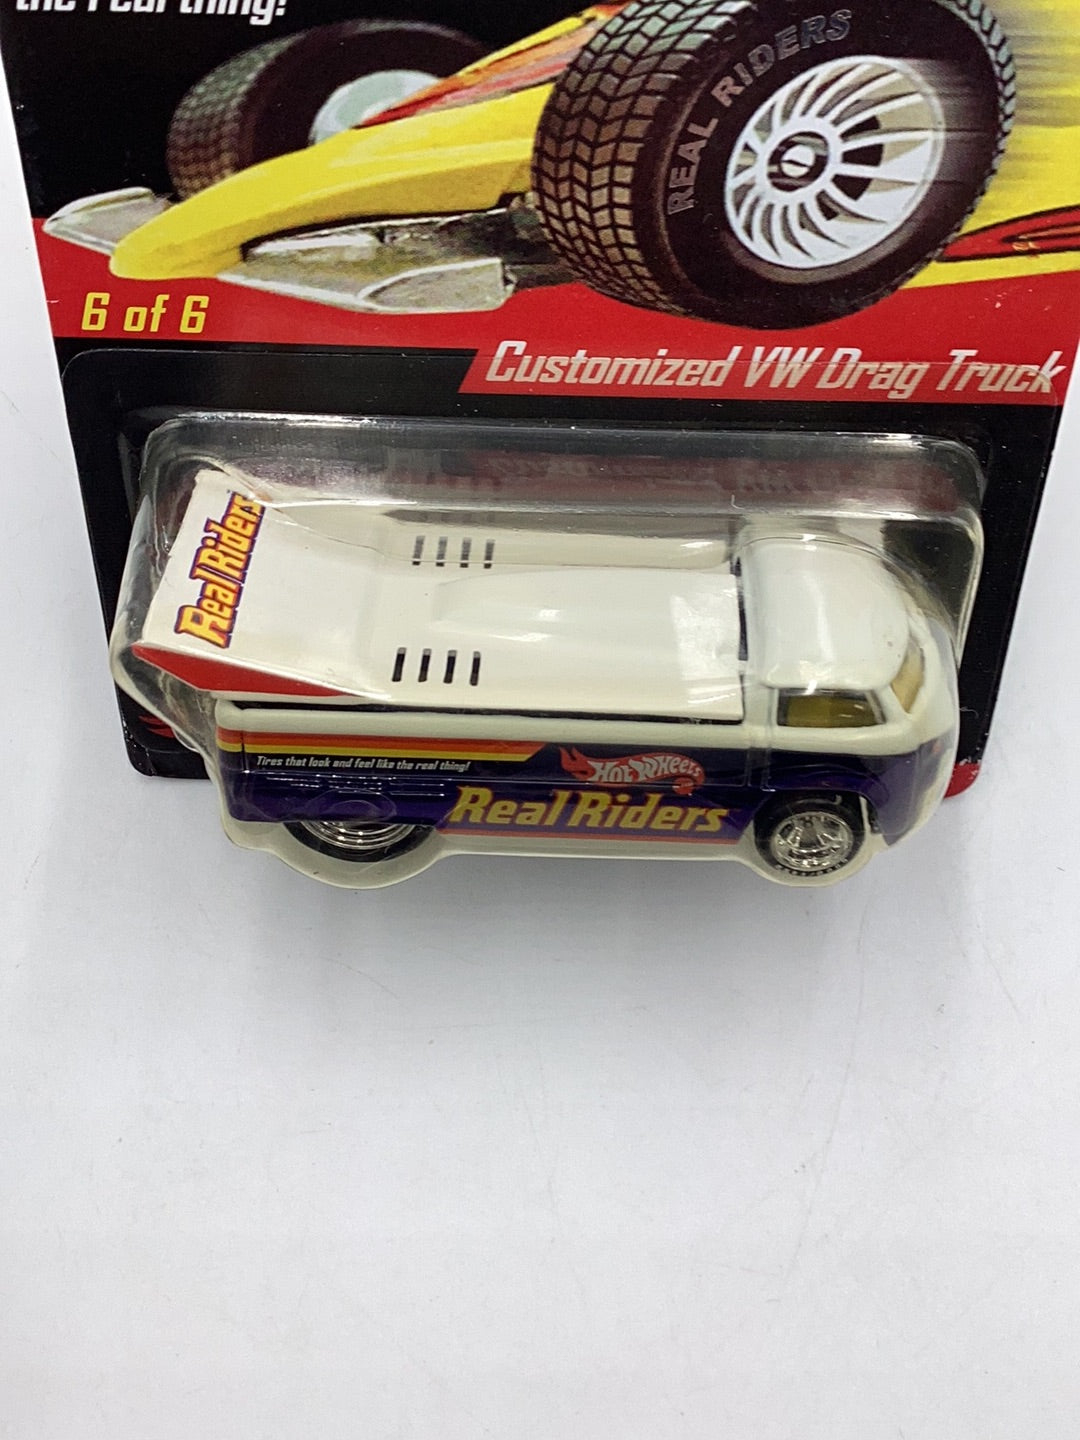 hot wheels RLC collectors.com series 5 Customized VW Drag Truck 5149/11000 with protector